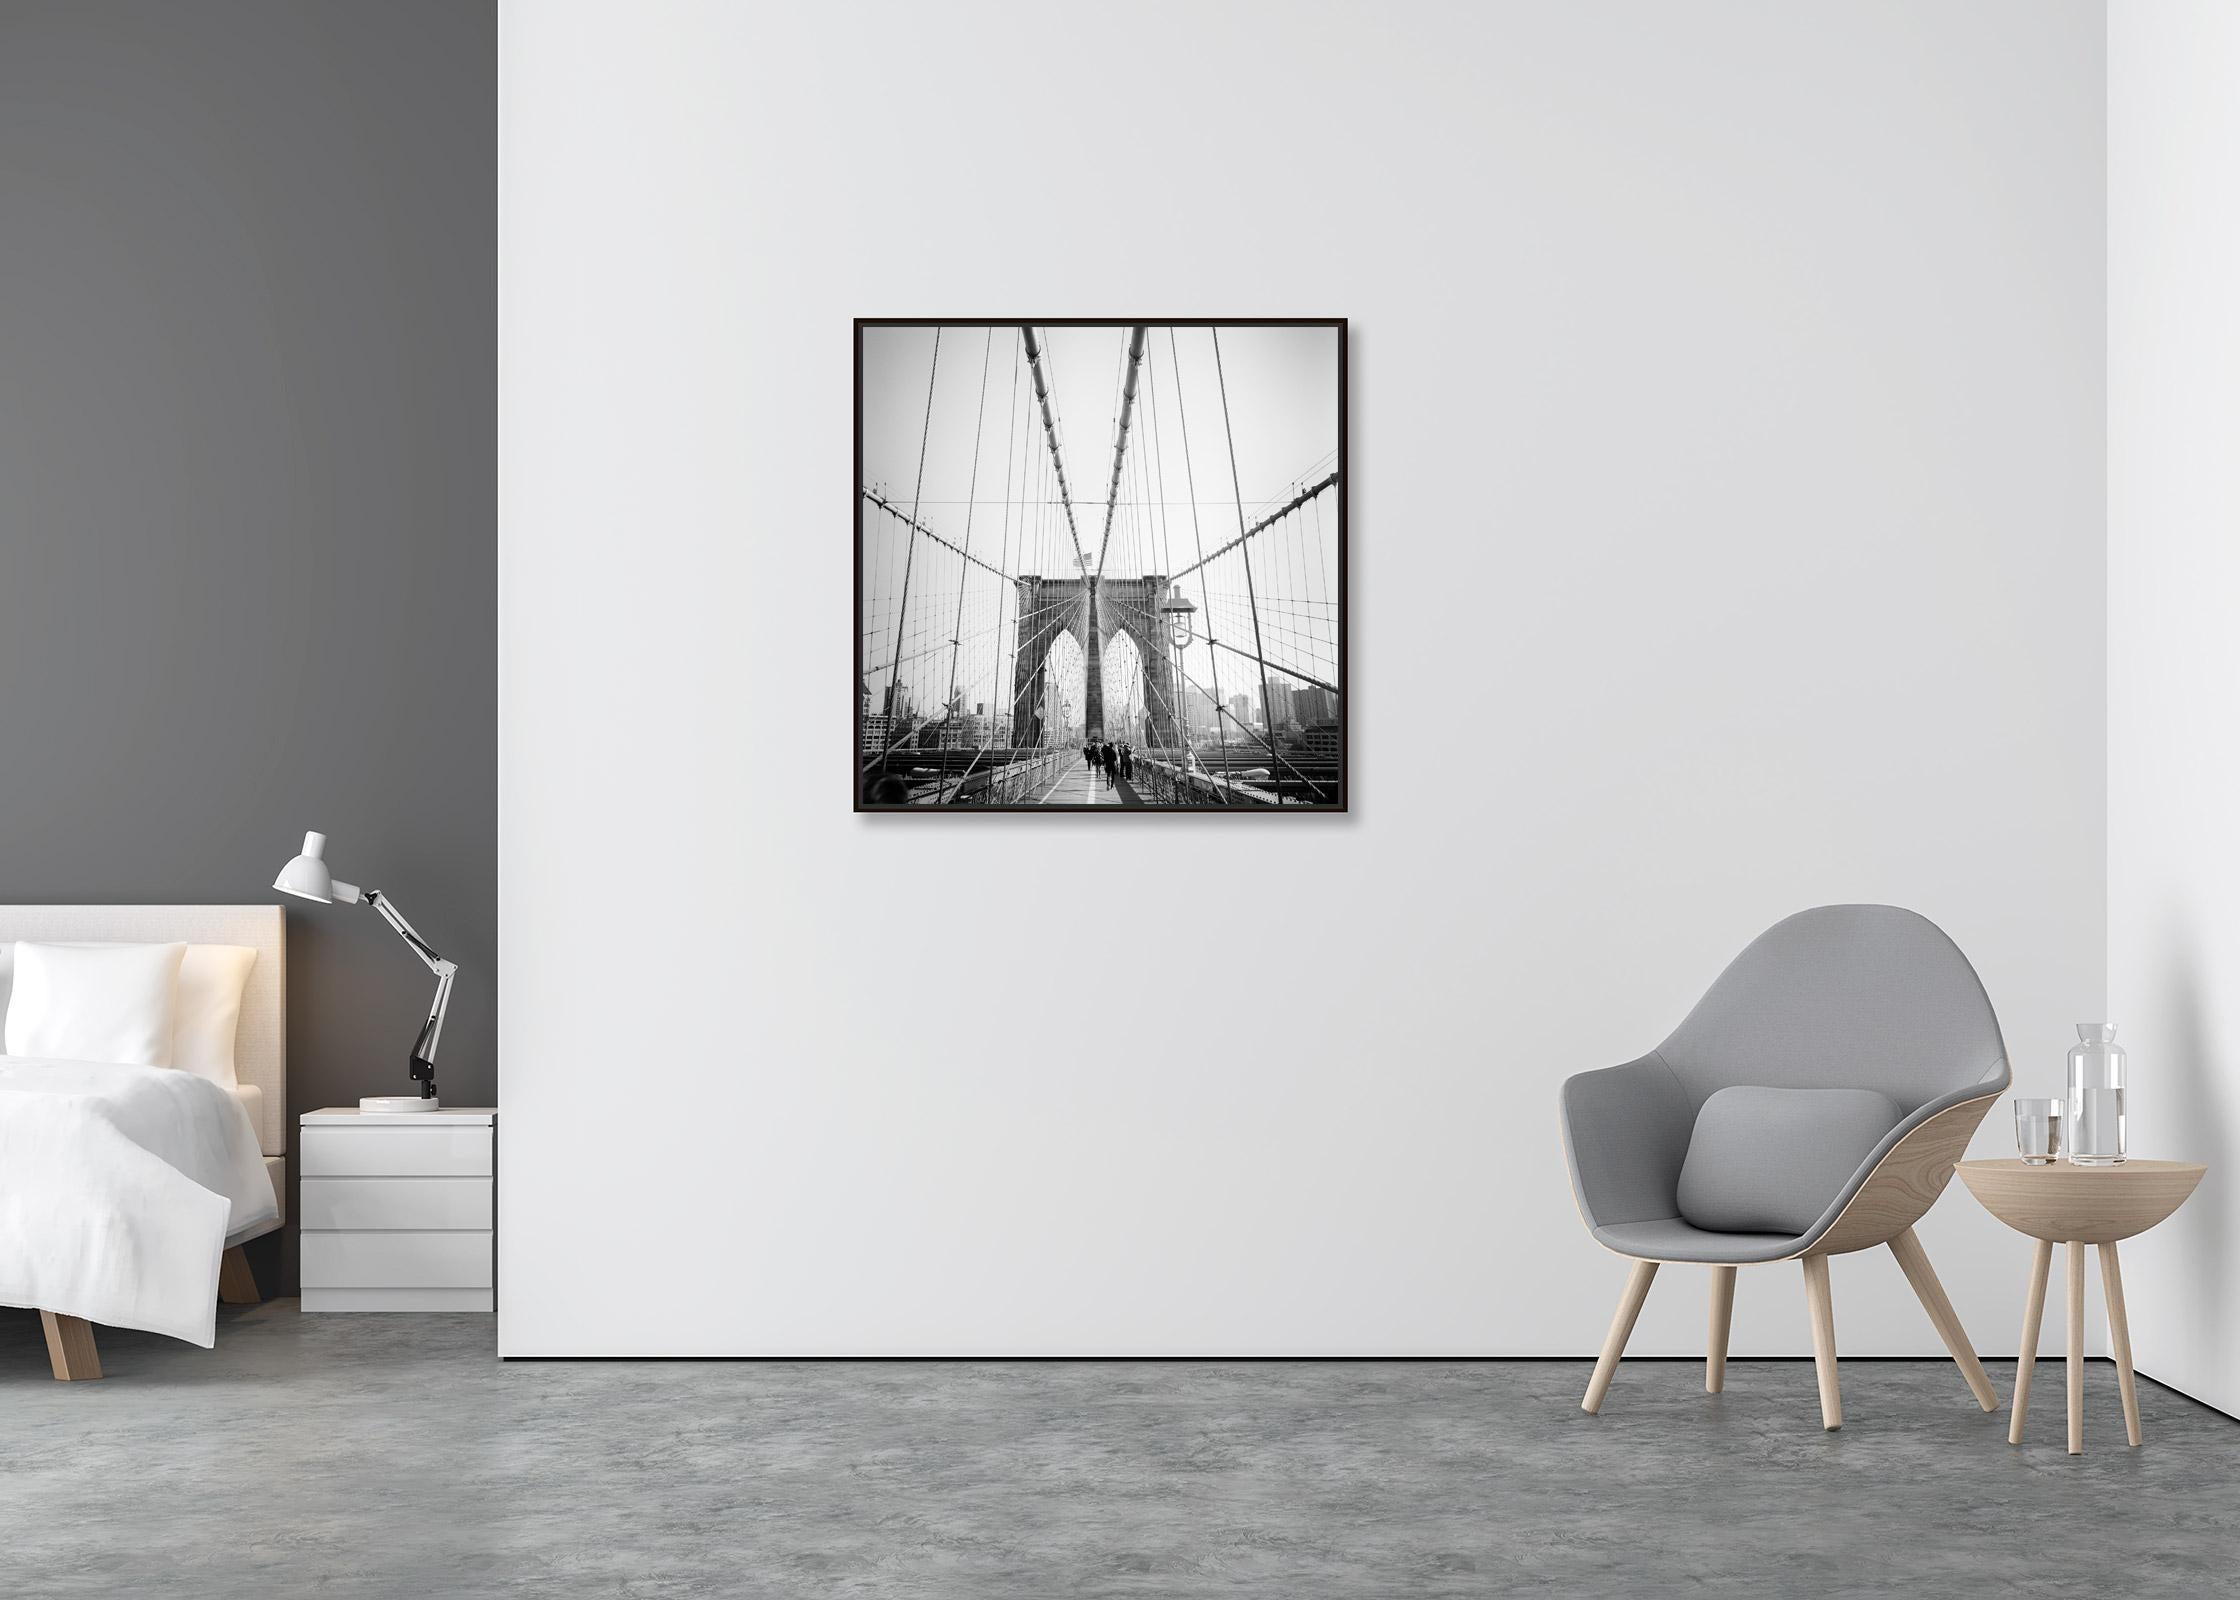 Brooklyn Bridge, New York City, USA, black and white photography, art landscape - Contemporary Photograph by Gerald Berghammer